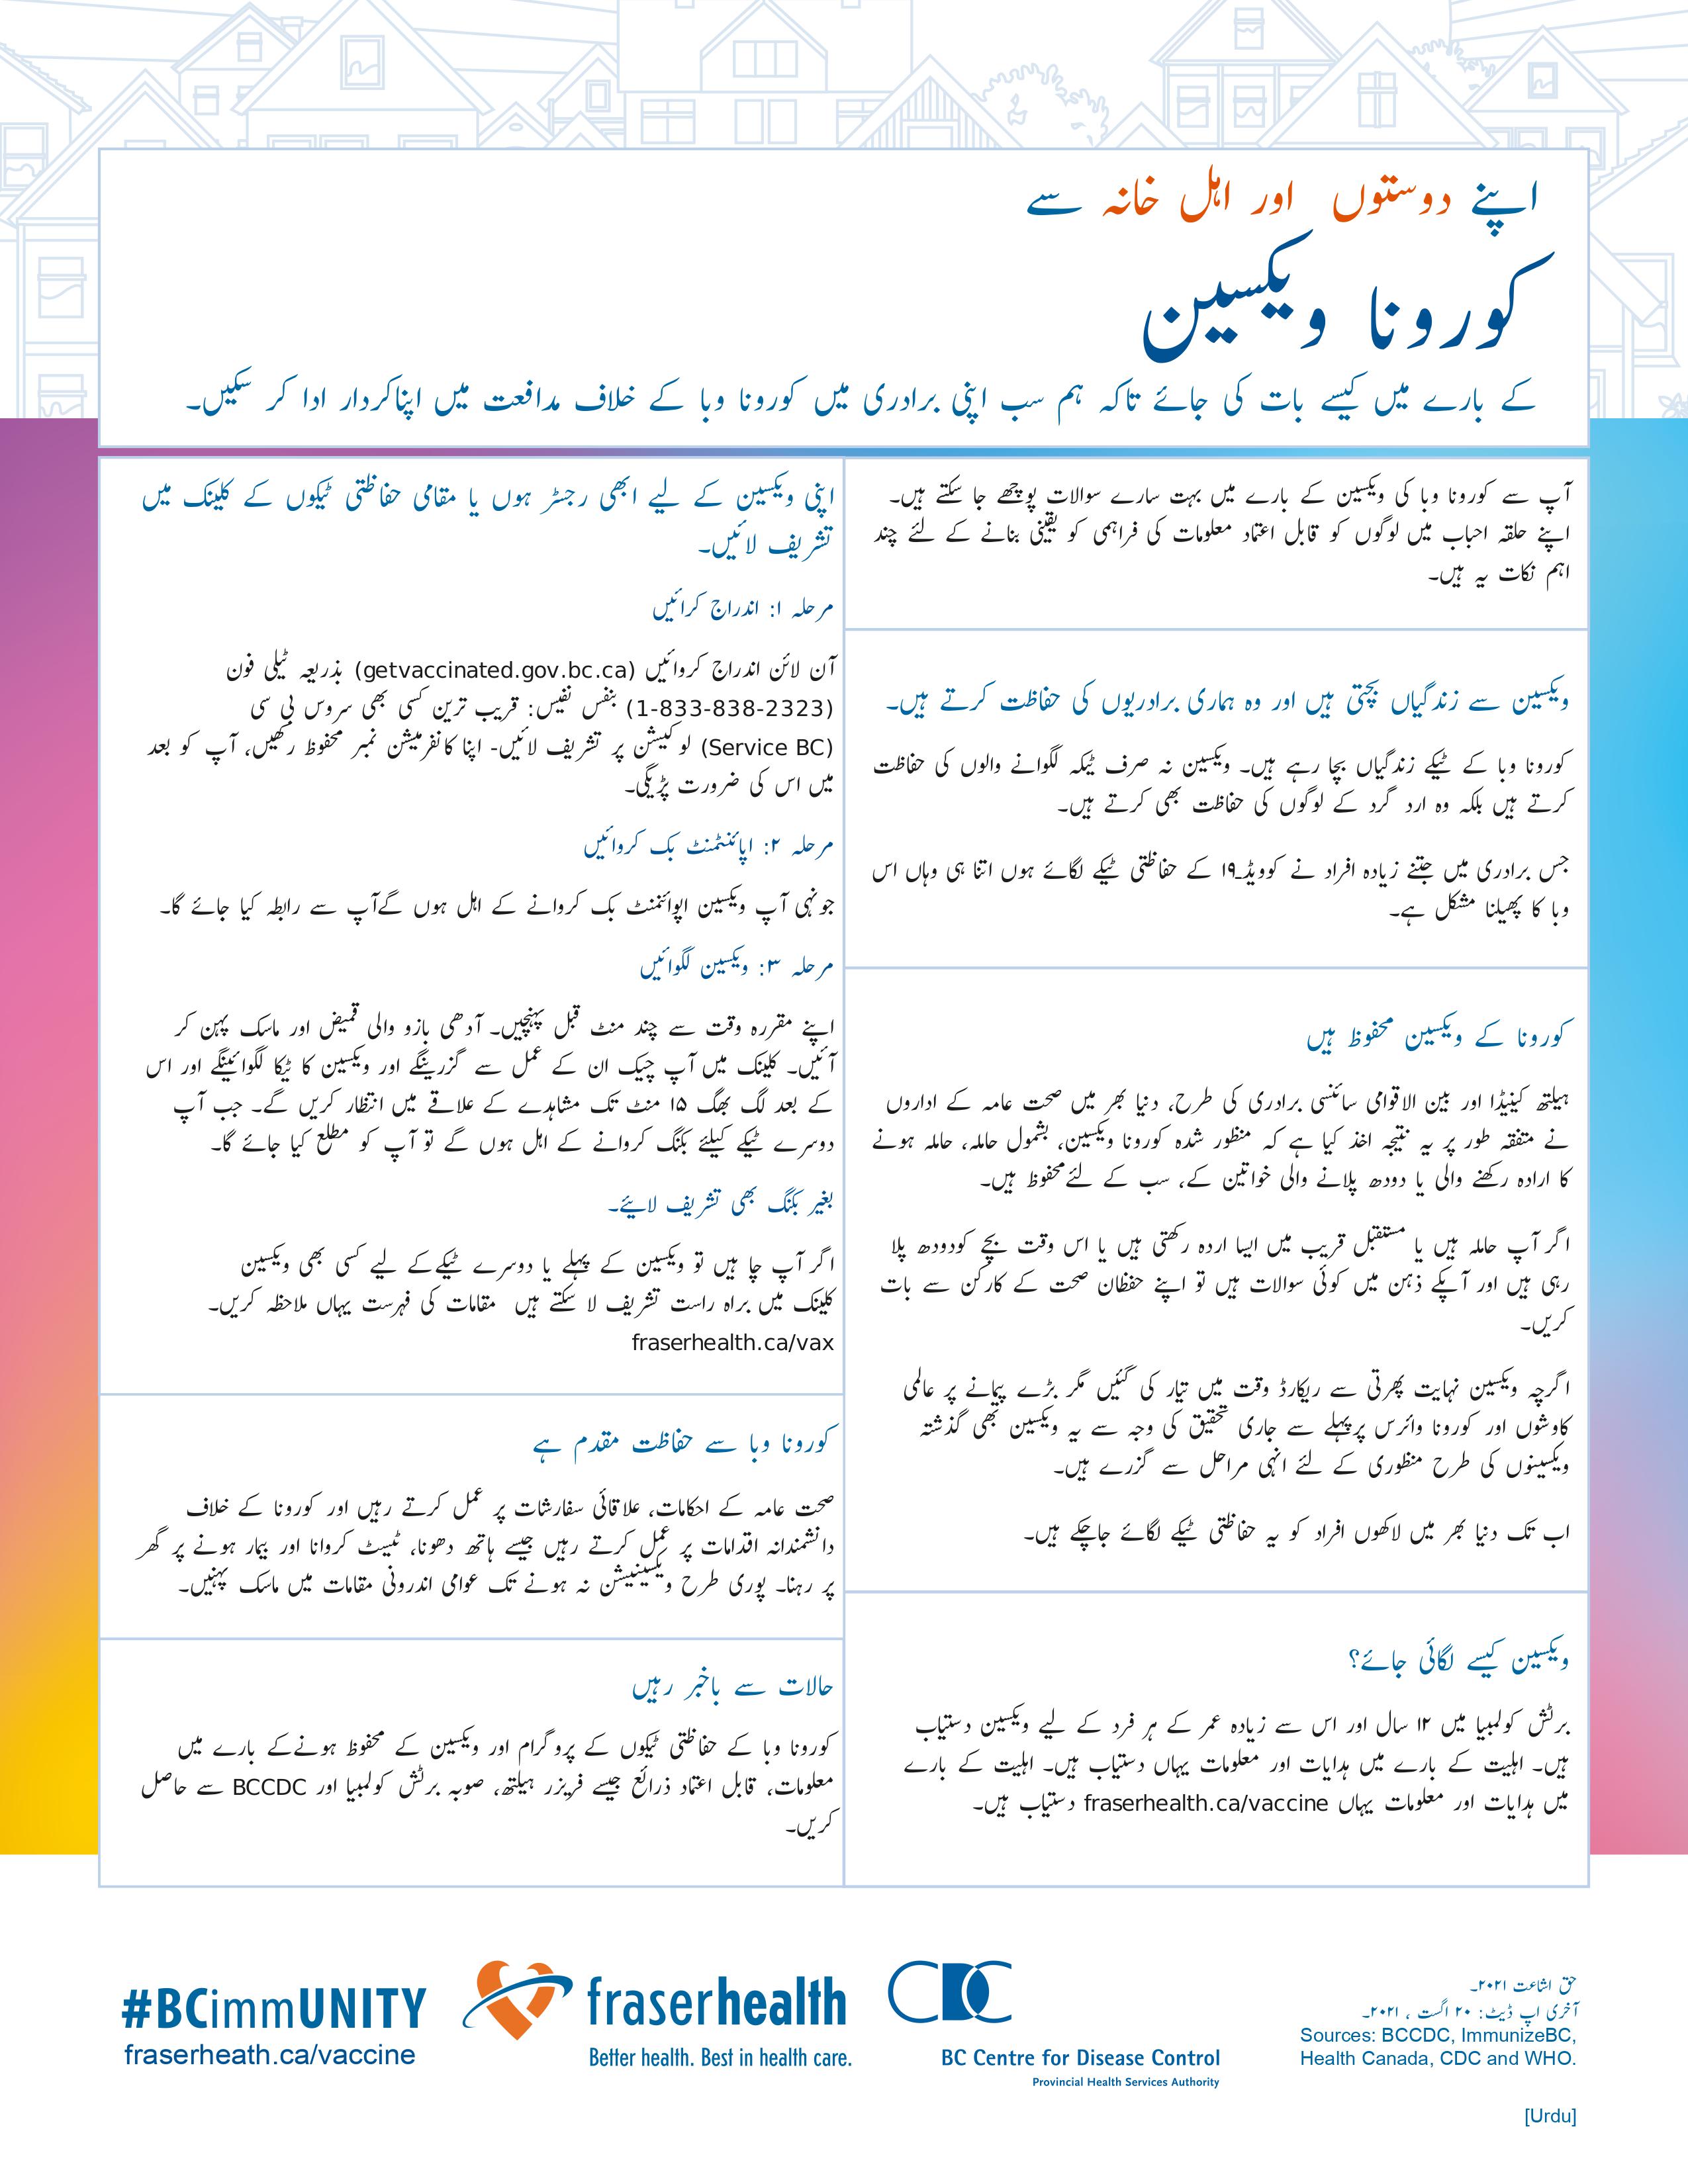 Infographic on how to talk to your friends about COVID-19 vaccines in Urdu